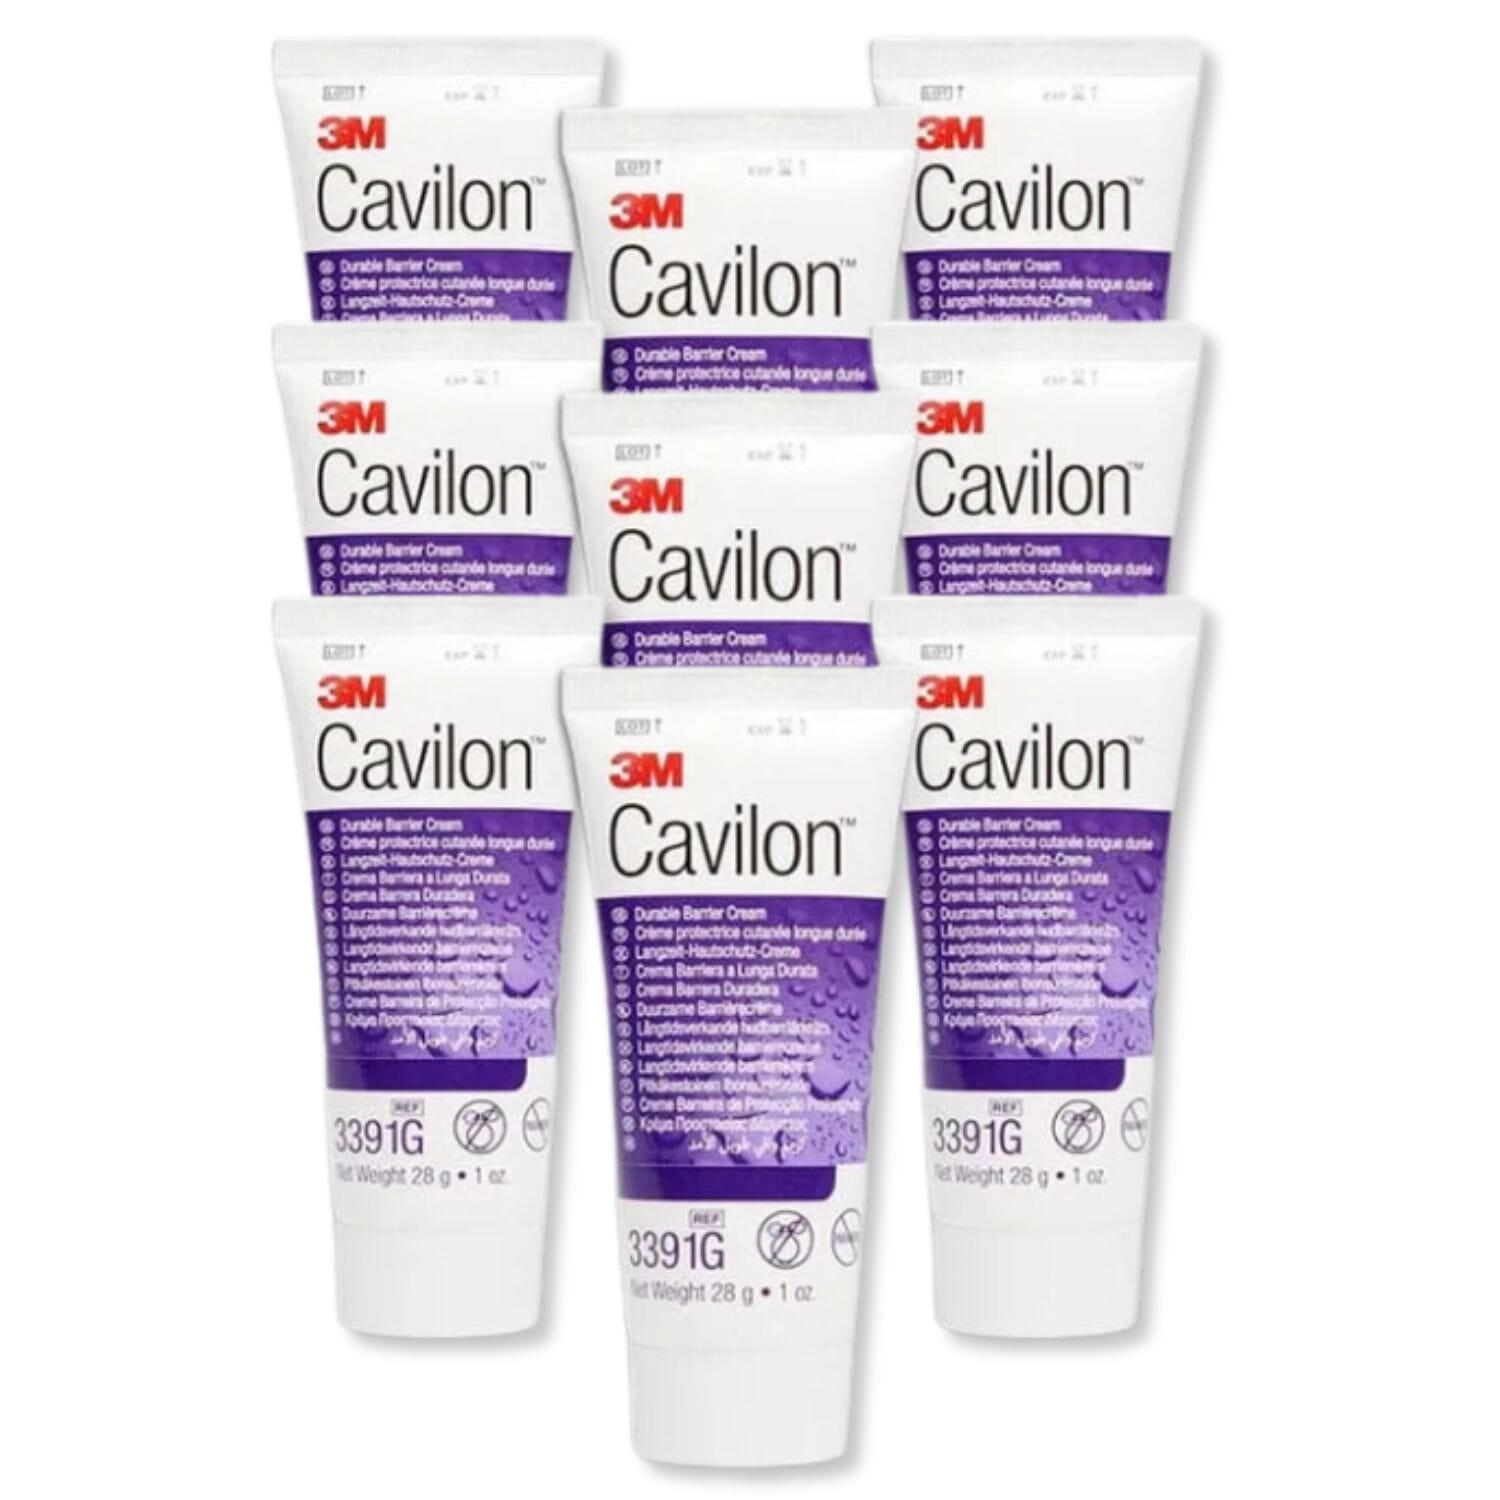 View Cavillion Durable Barrier Cream Multi Pack 28g Tube Pack of 12 information